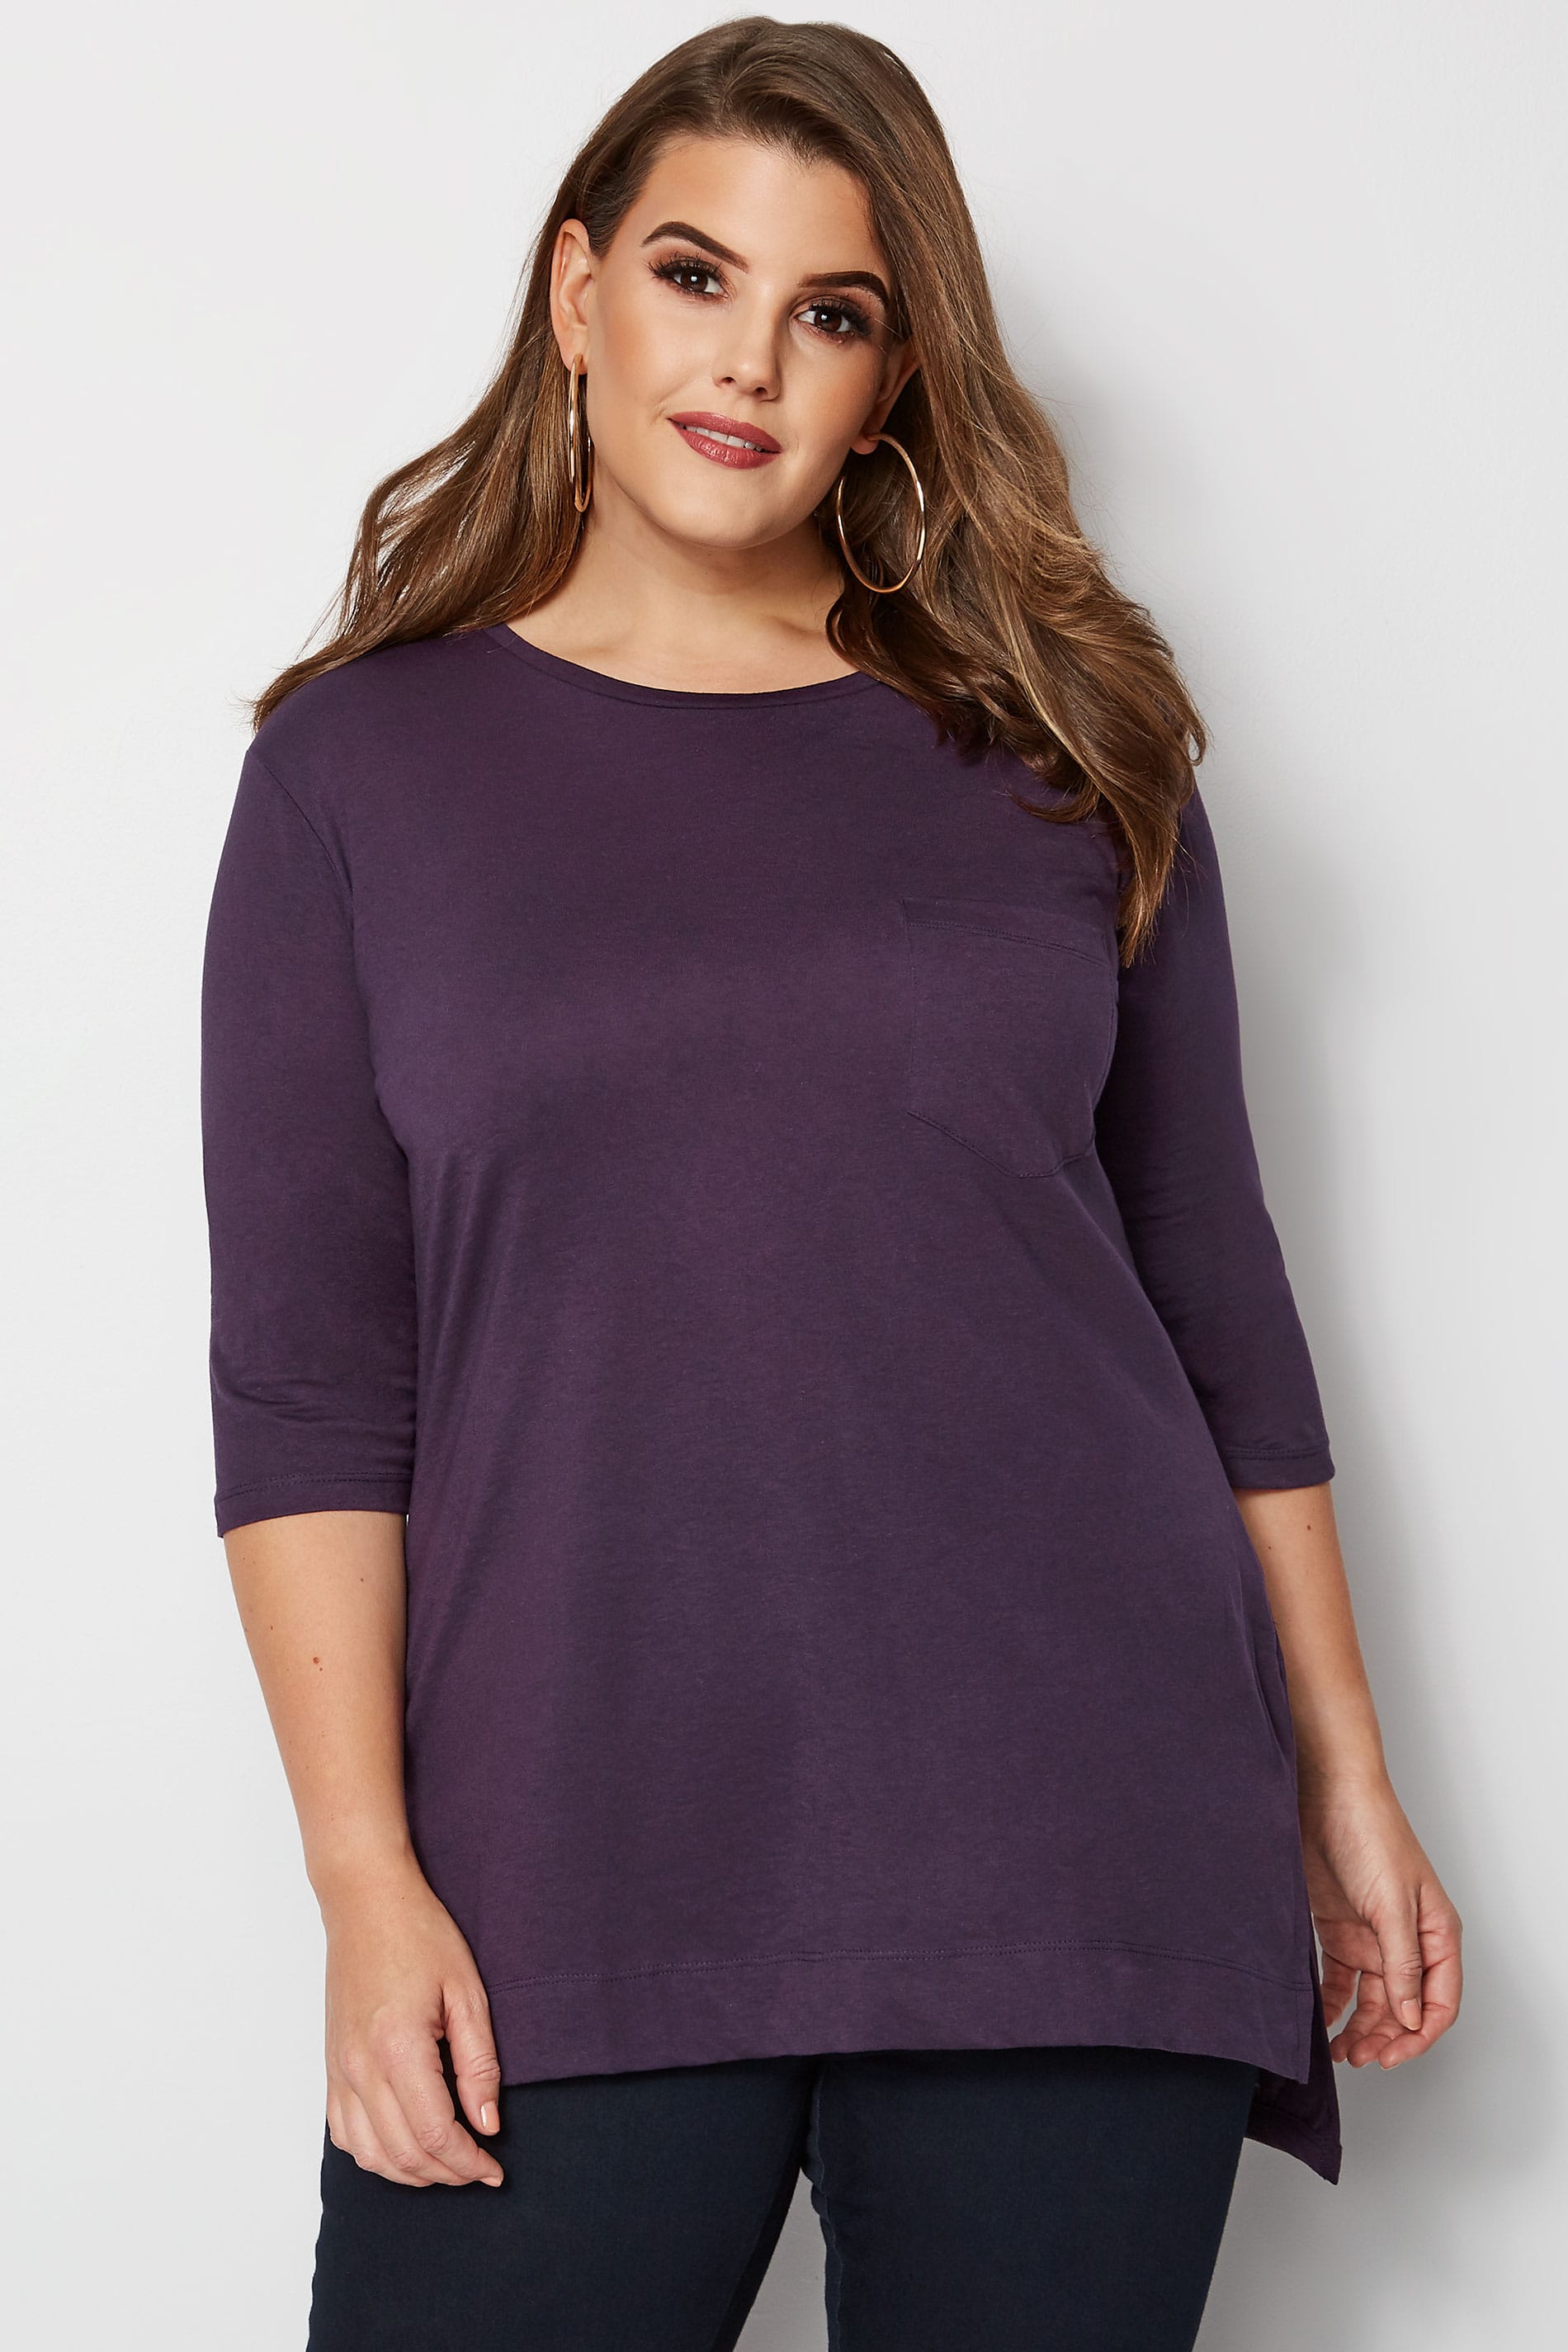 Purple Top With Chest Pocket